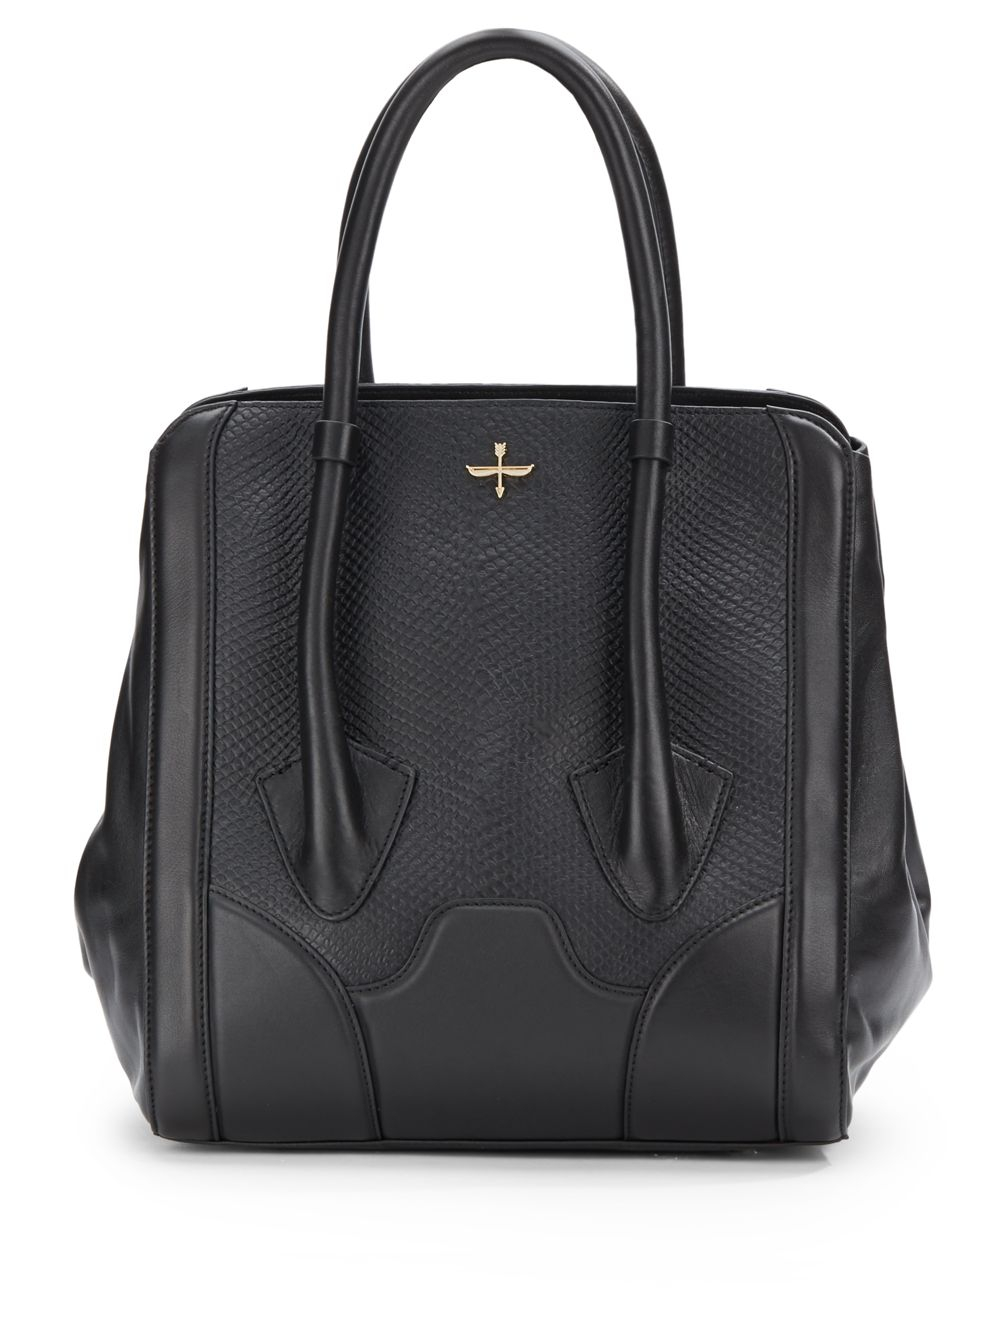 Pour La Victoire Butler Embossed Leather Tote Bag in Black | Lyst